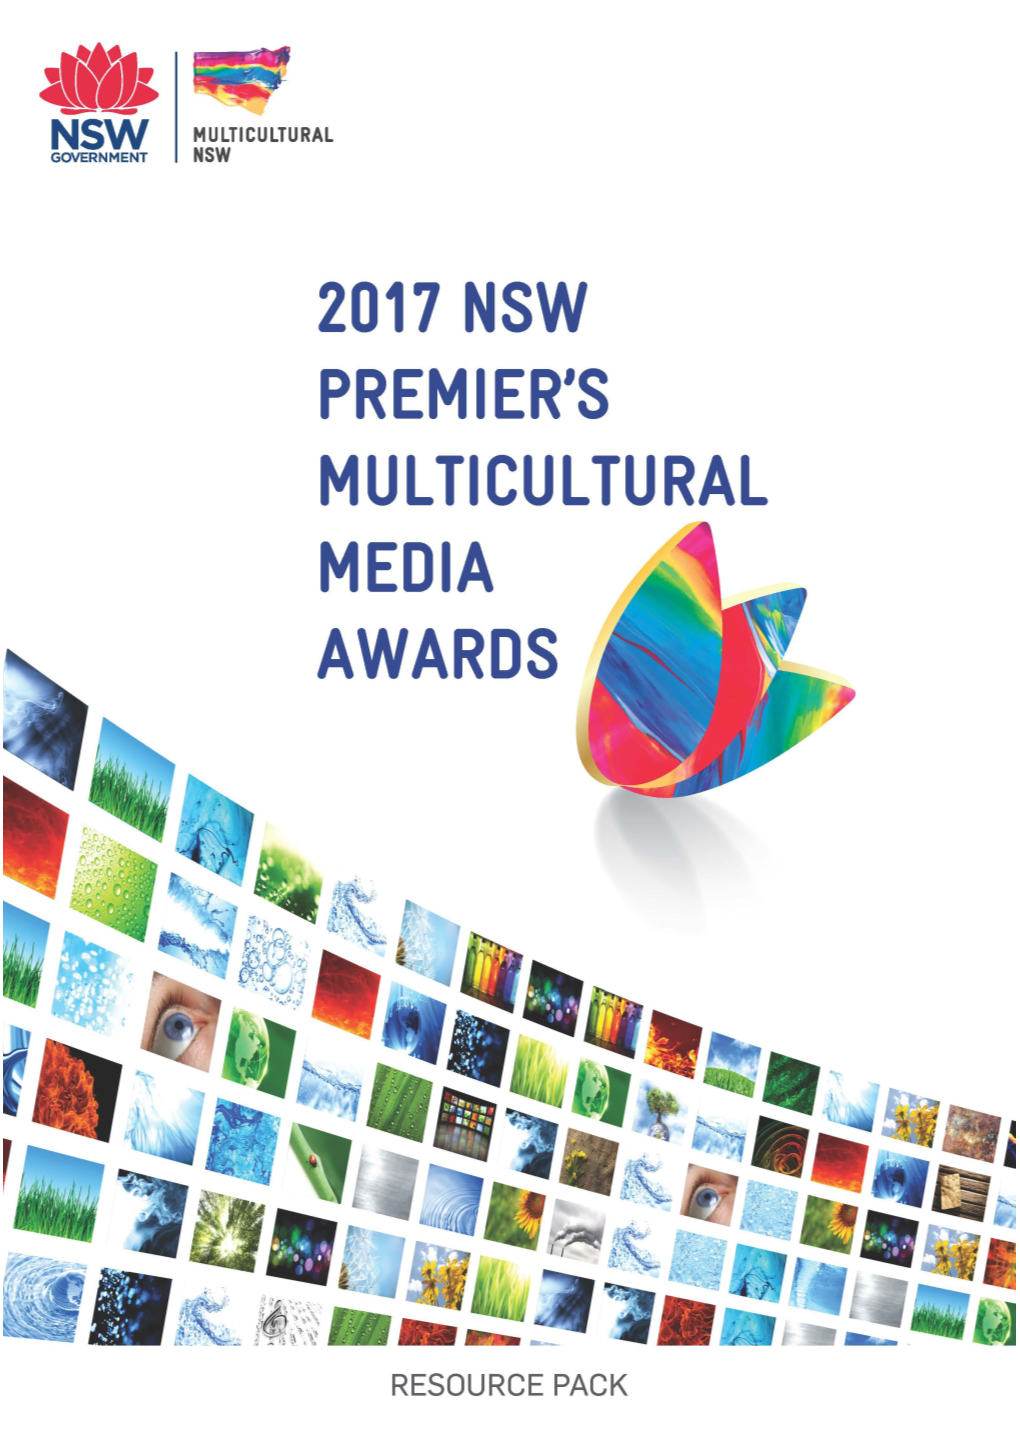 Example: Nominations Are Now Open for the 2017 NSW Premier S Multicultural Media Awards! #PMMA17